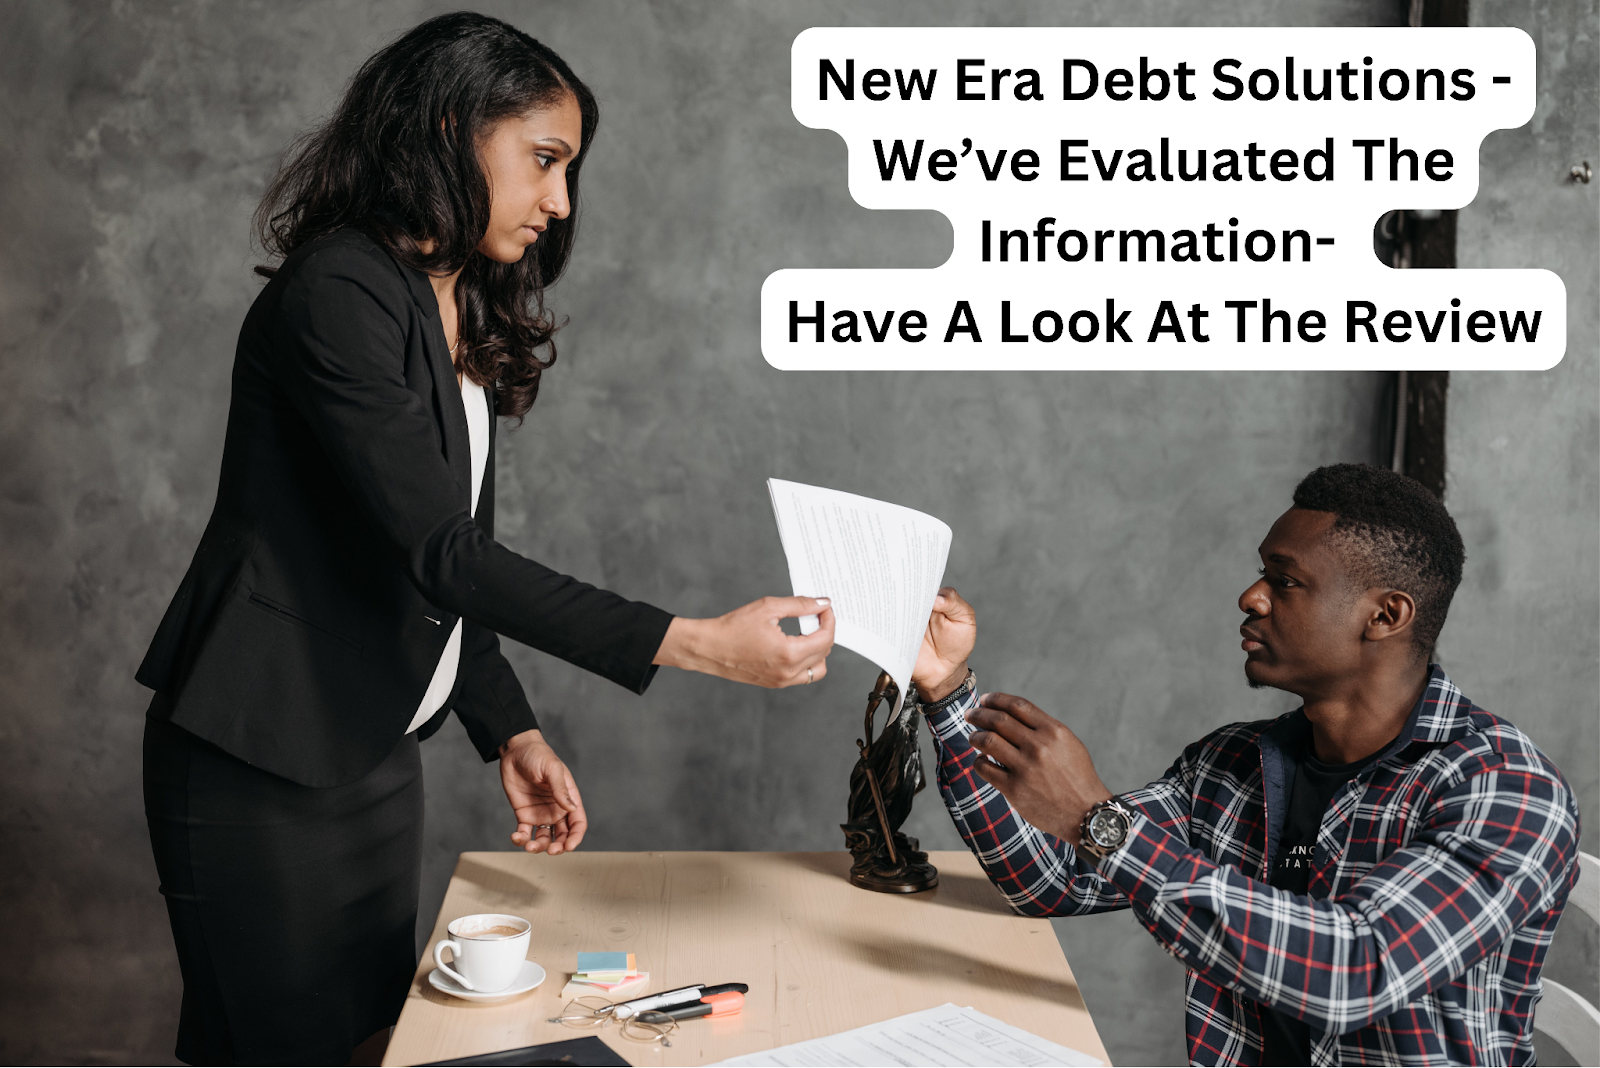 New Era Debt Solutions - We’ve Evaluated The Information- Have A Look At The Review